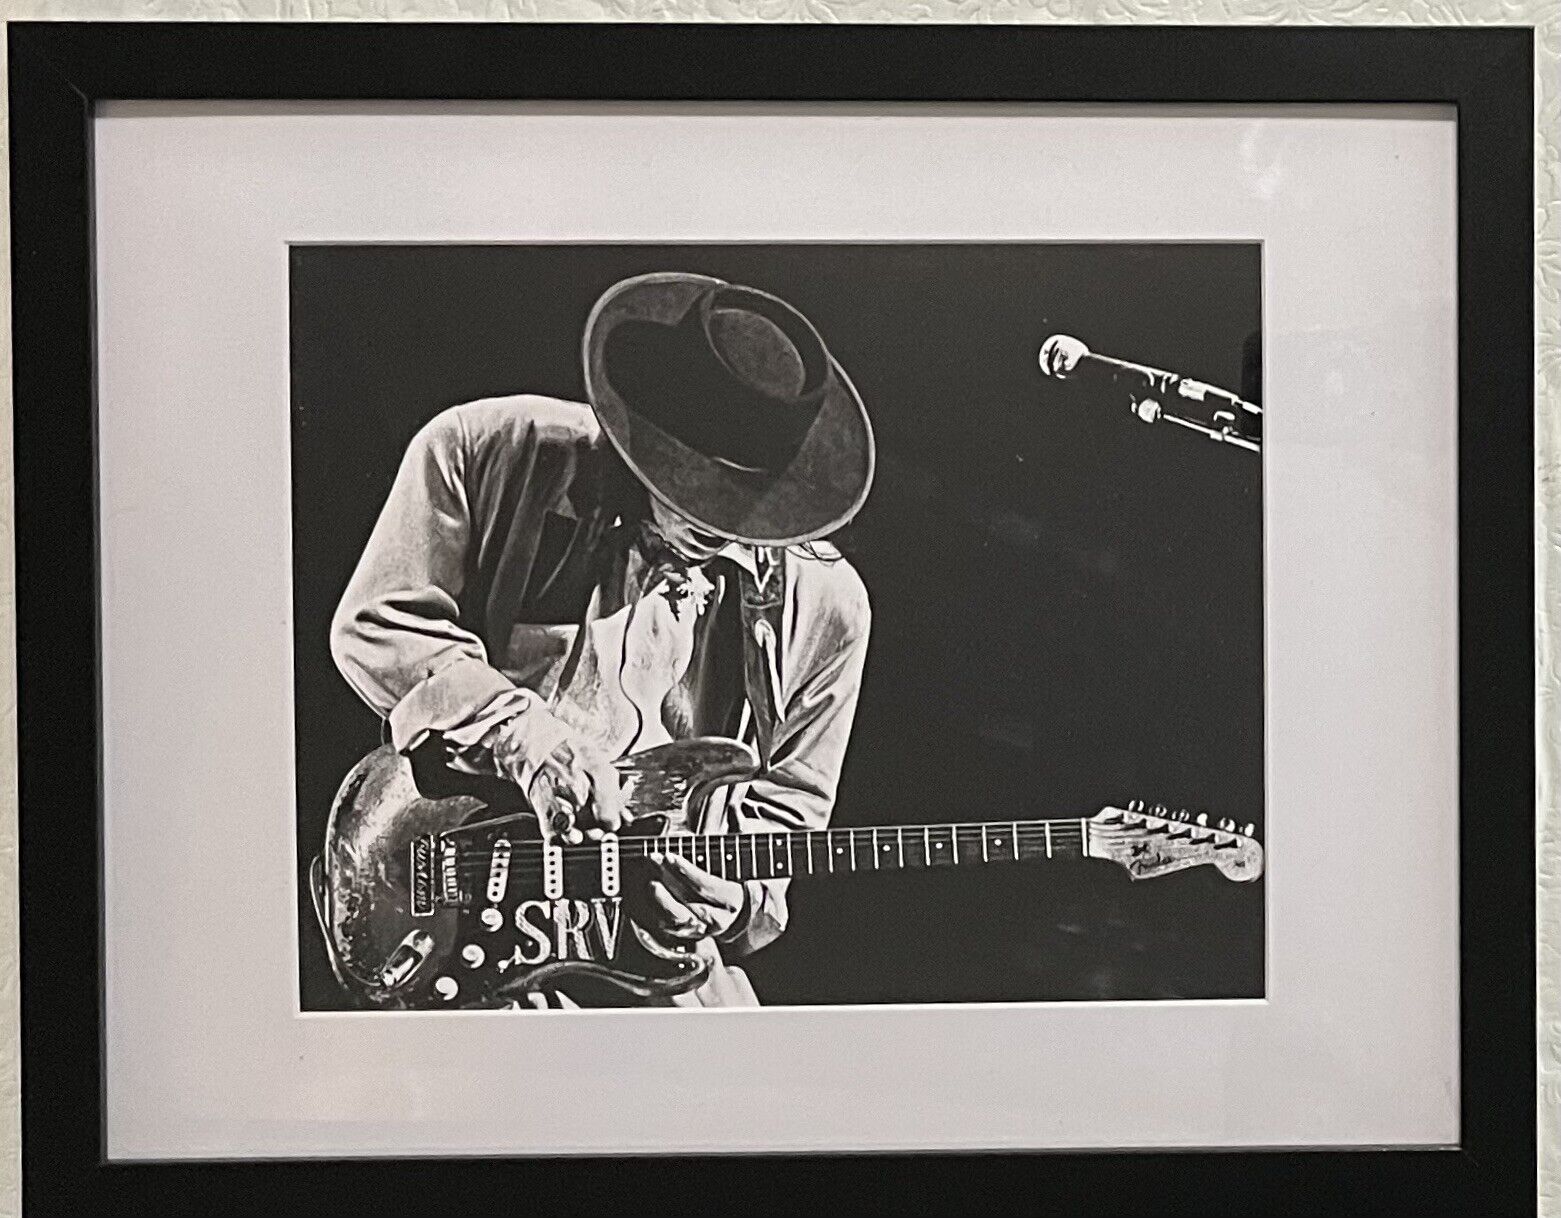 New Framed And Matted 8x10 Color Photo of Guitar Legend Stevie Ray Vaughan